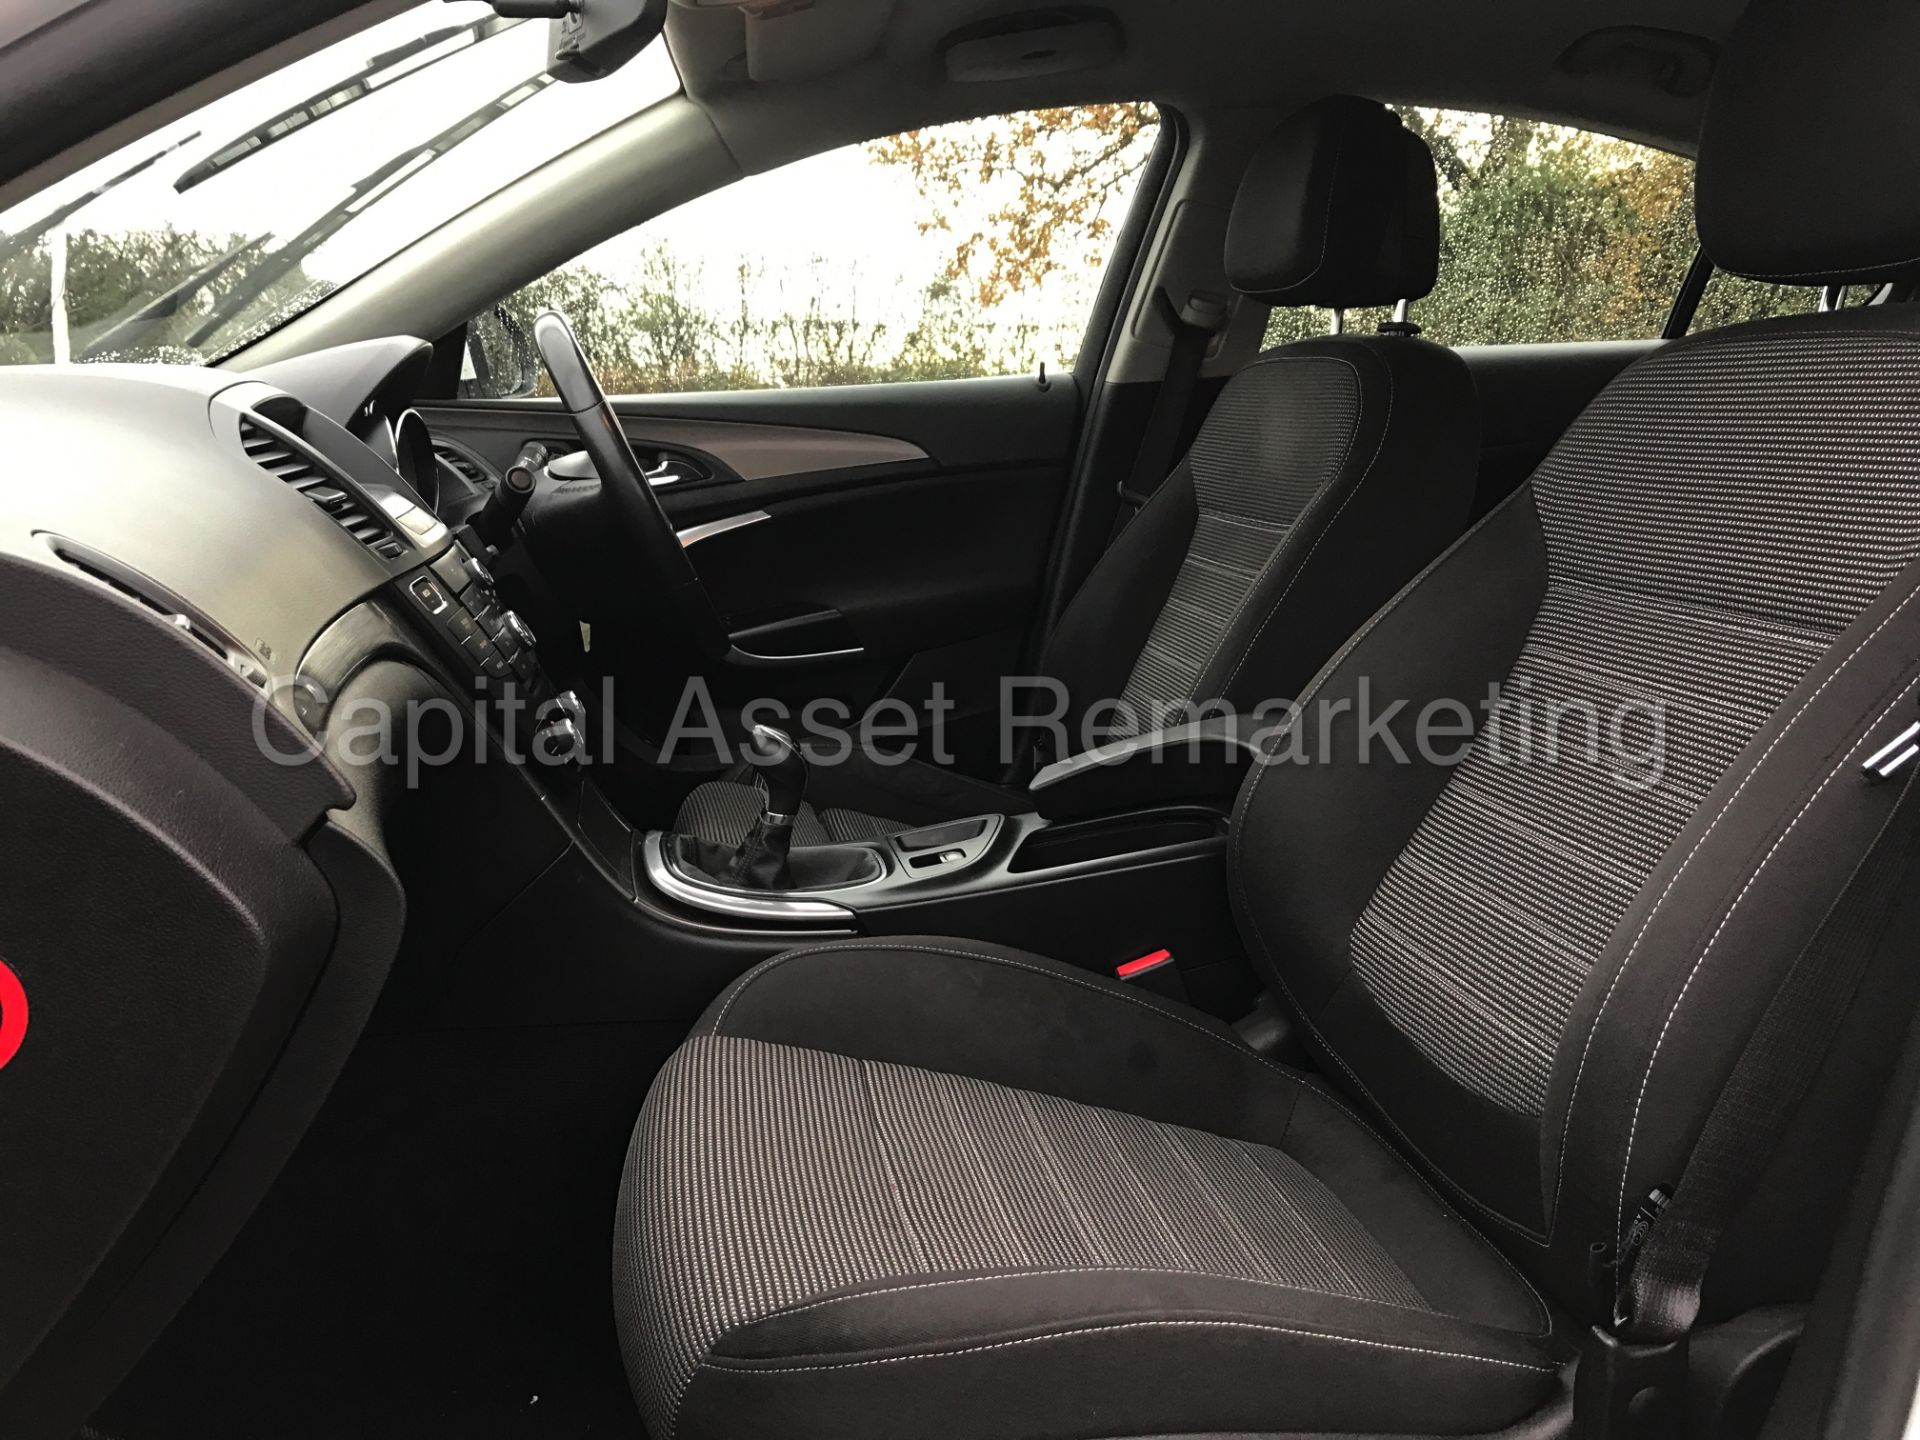 VAUXHALL INSIGNIA 'EXCLUSIVE' (2012) '2.0 CDTI - 6 SPEED - STOP/START - AIR CON' *1 FORMER KEEPER* - Image 14 of 26